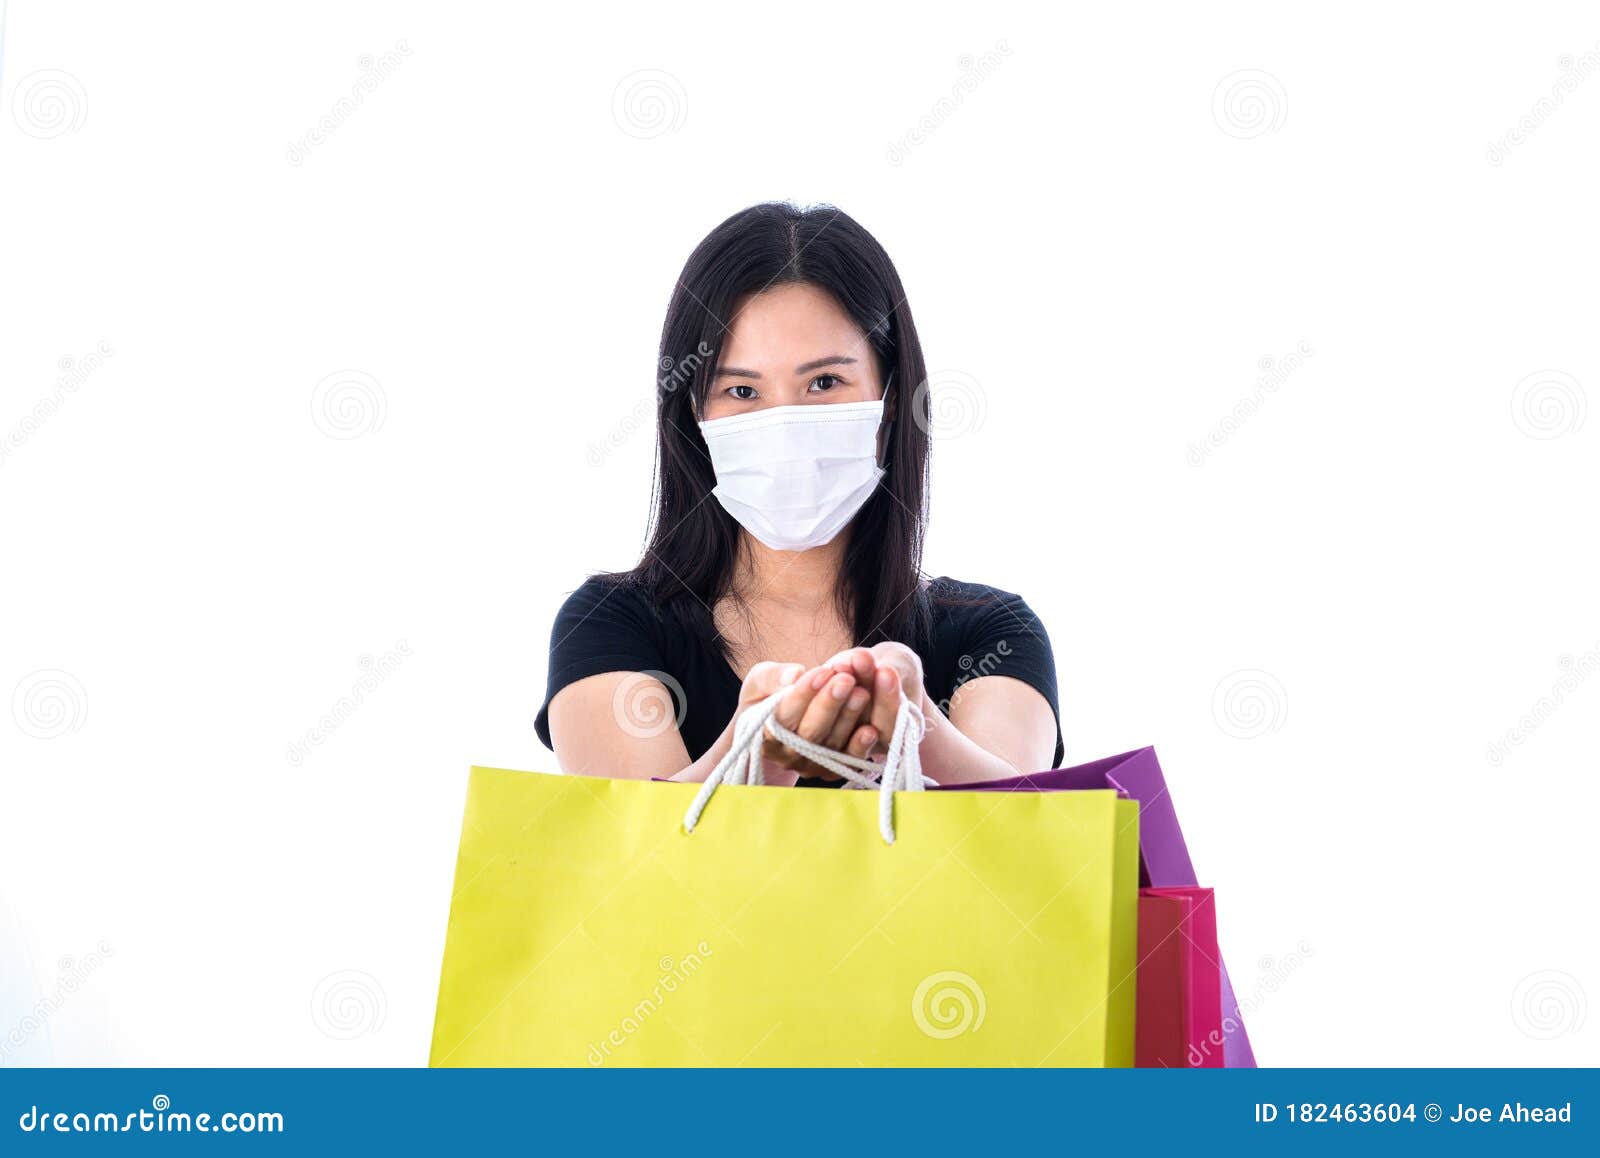 2 509 Paper Bag Mask Photos Free Royalty Free Stock Photos From Dreamstime